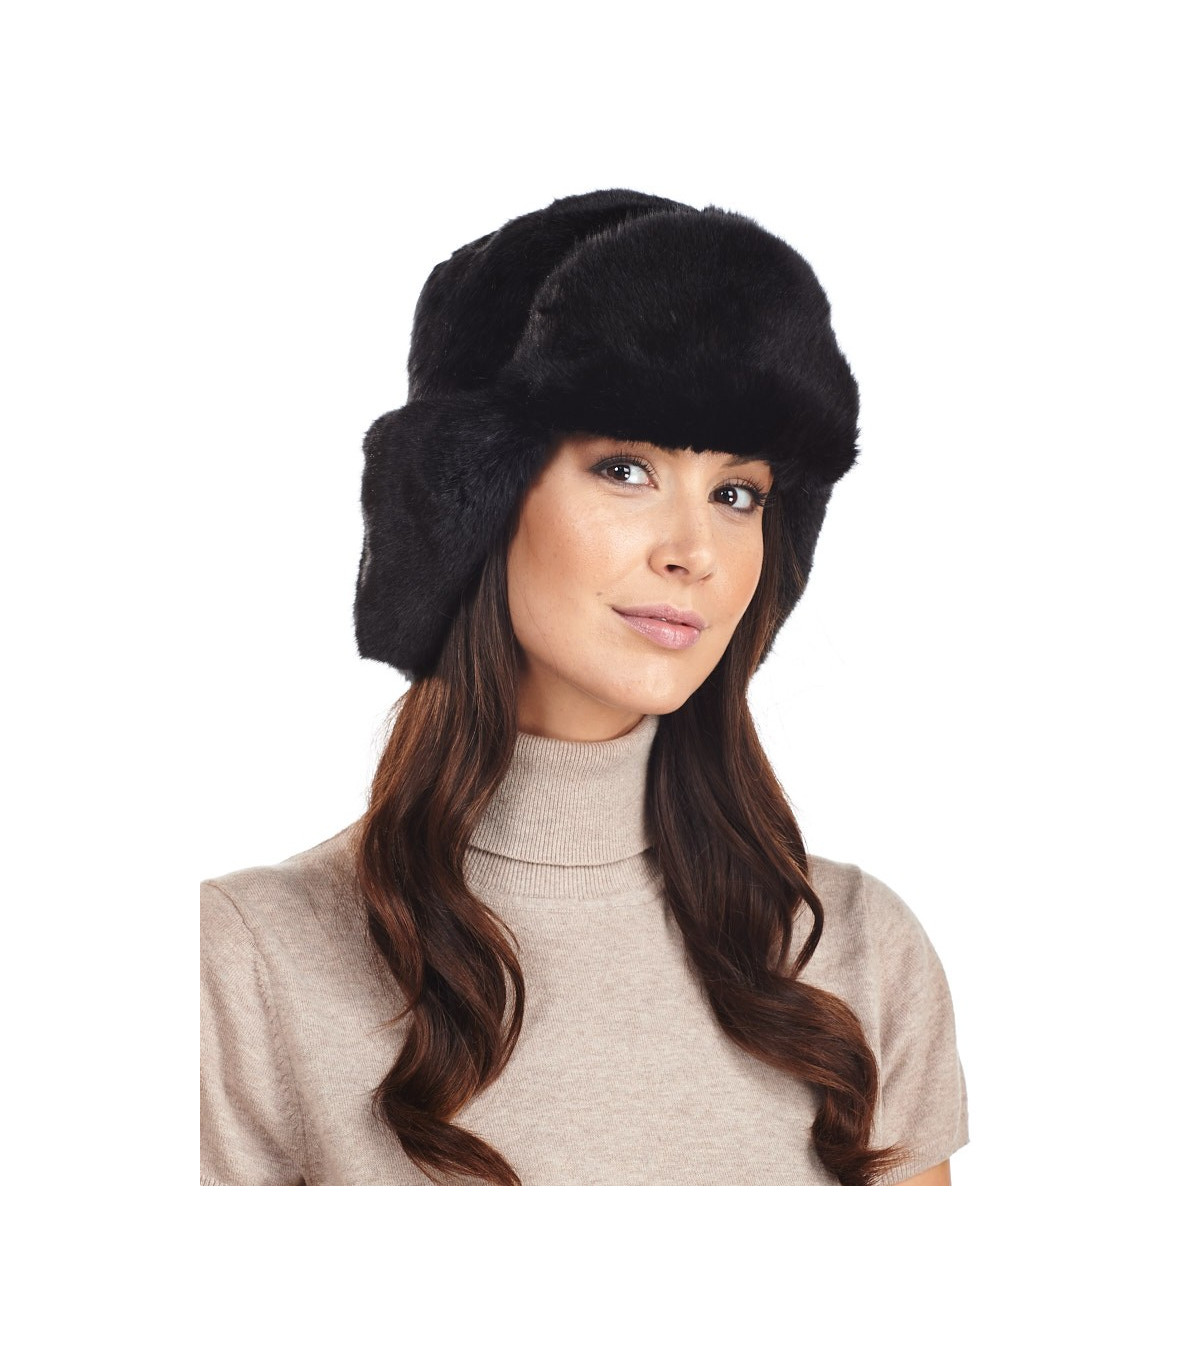 The Calgary Faux Fur Ladies Trapper Hat in Black at Fur Hat World